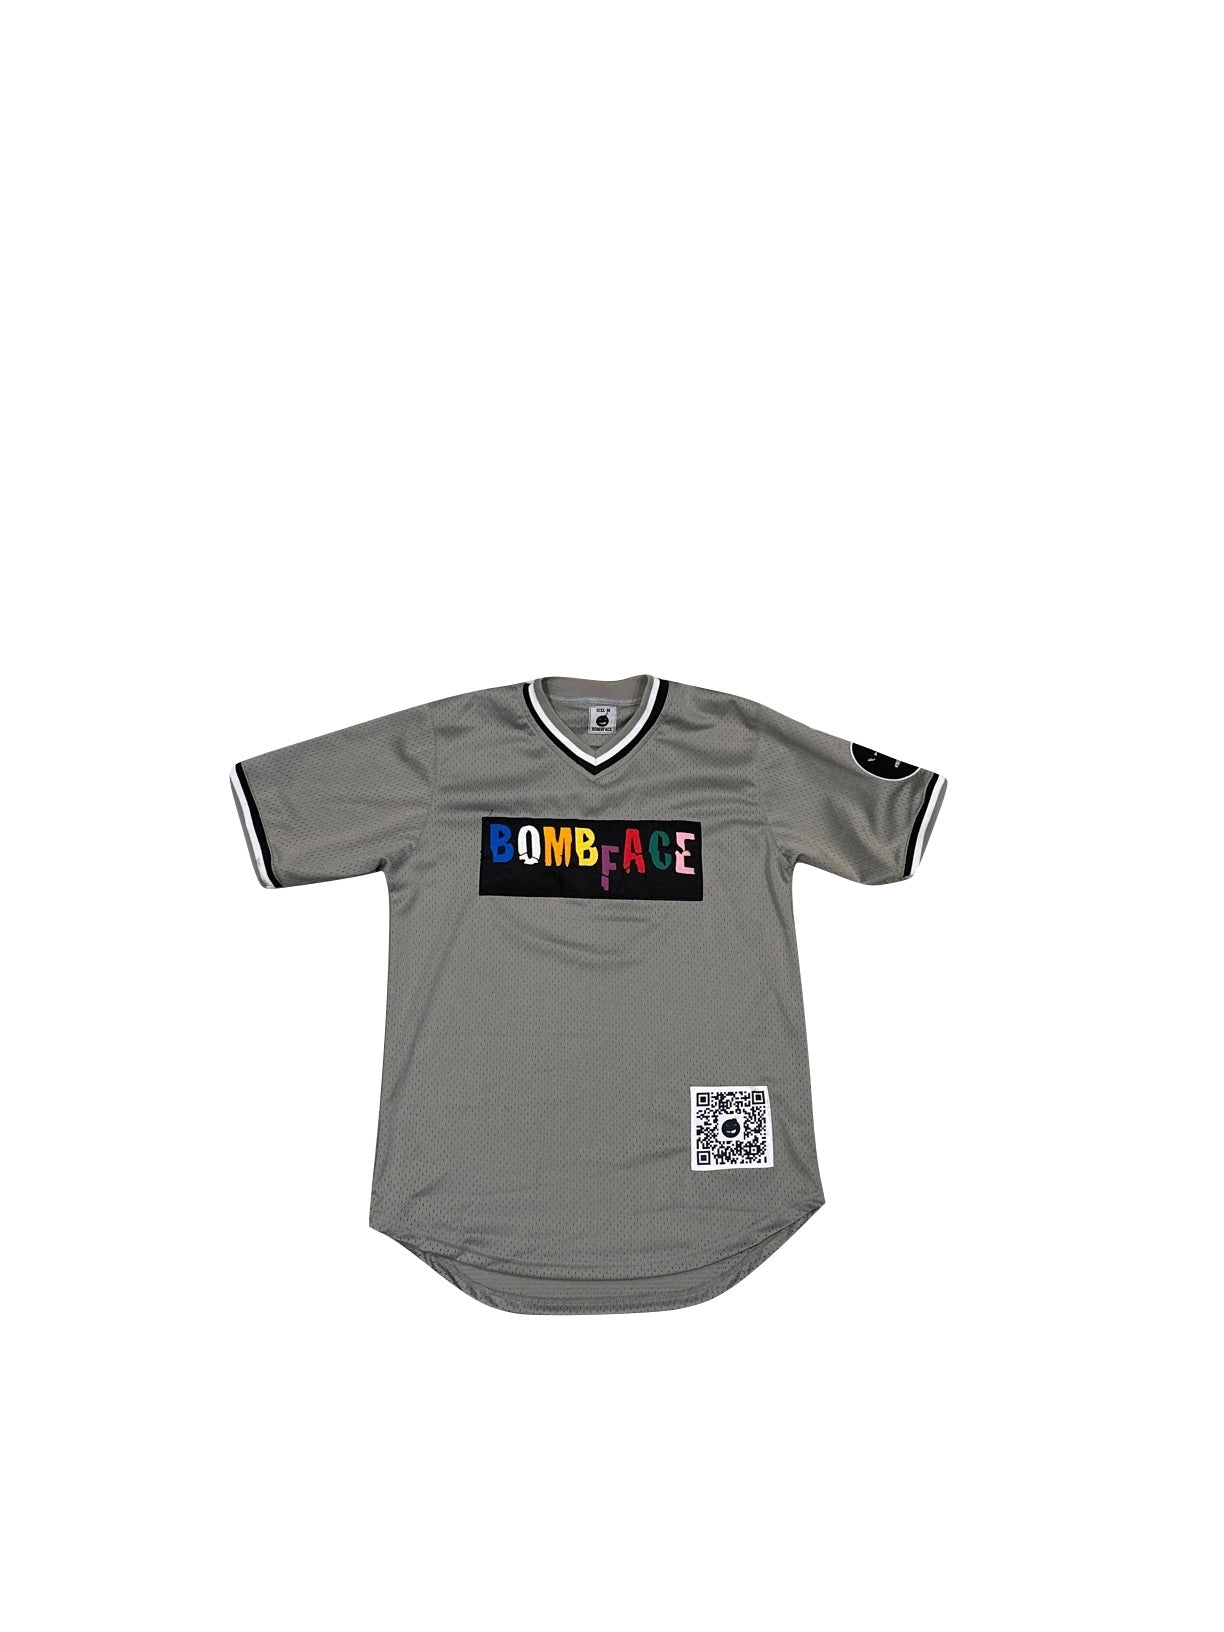 Gray baseball jersey, heavy cotton baseball jersey. v-neck baseball jersey, BombFace baseball jersey with colorful embroidered patch. Grey baseball jersey.